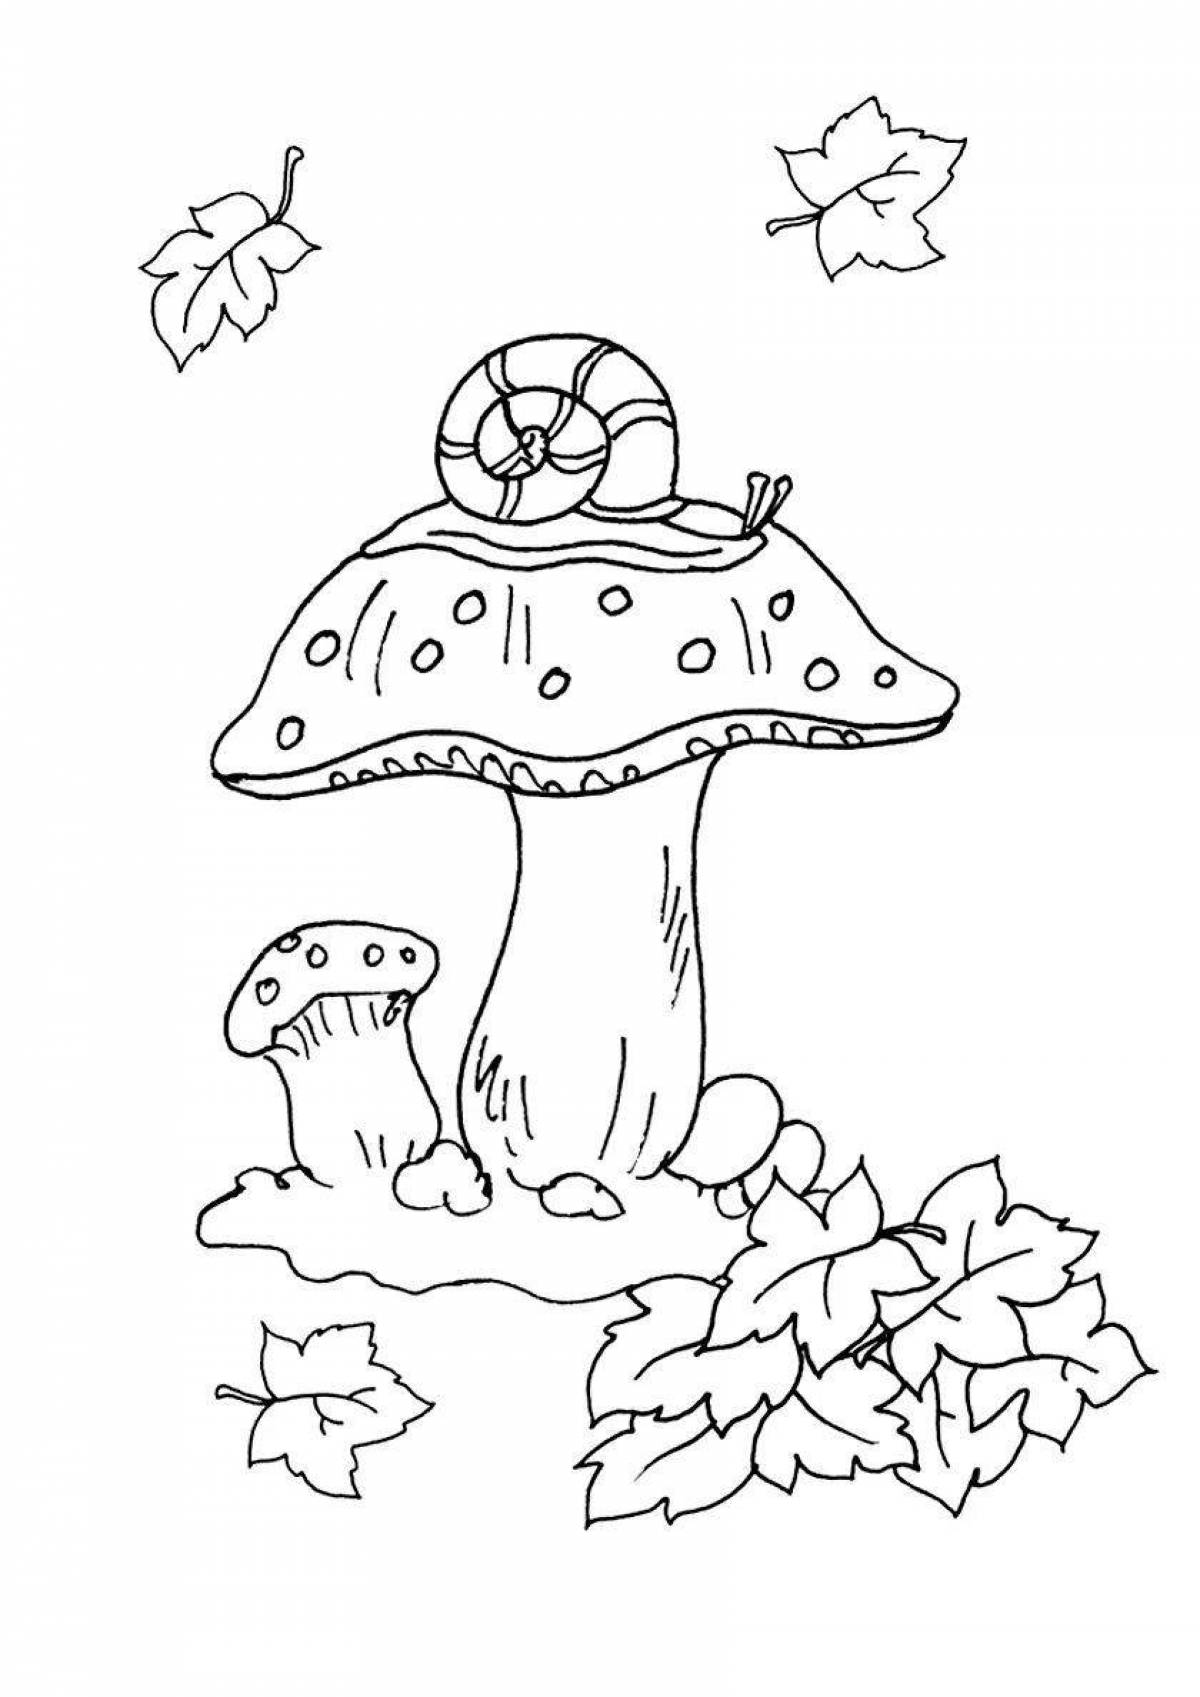 Fun autumn coloring for children 6-7 years old